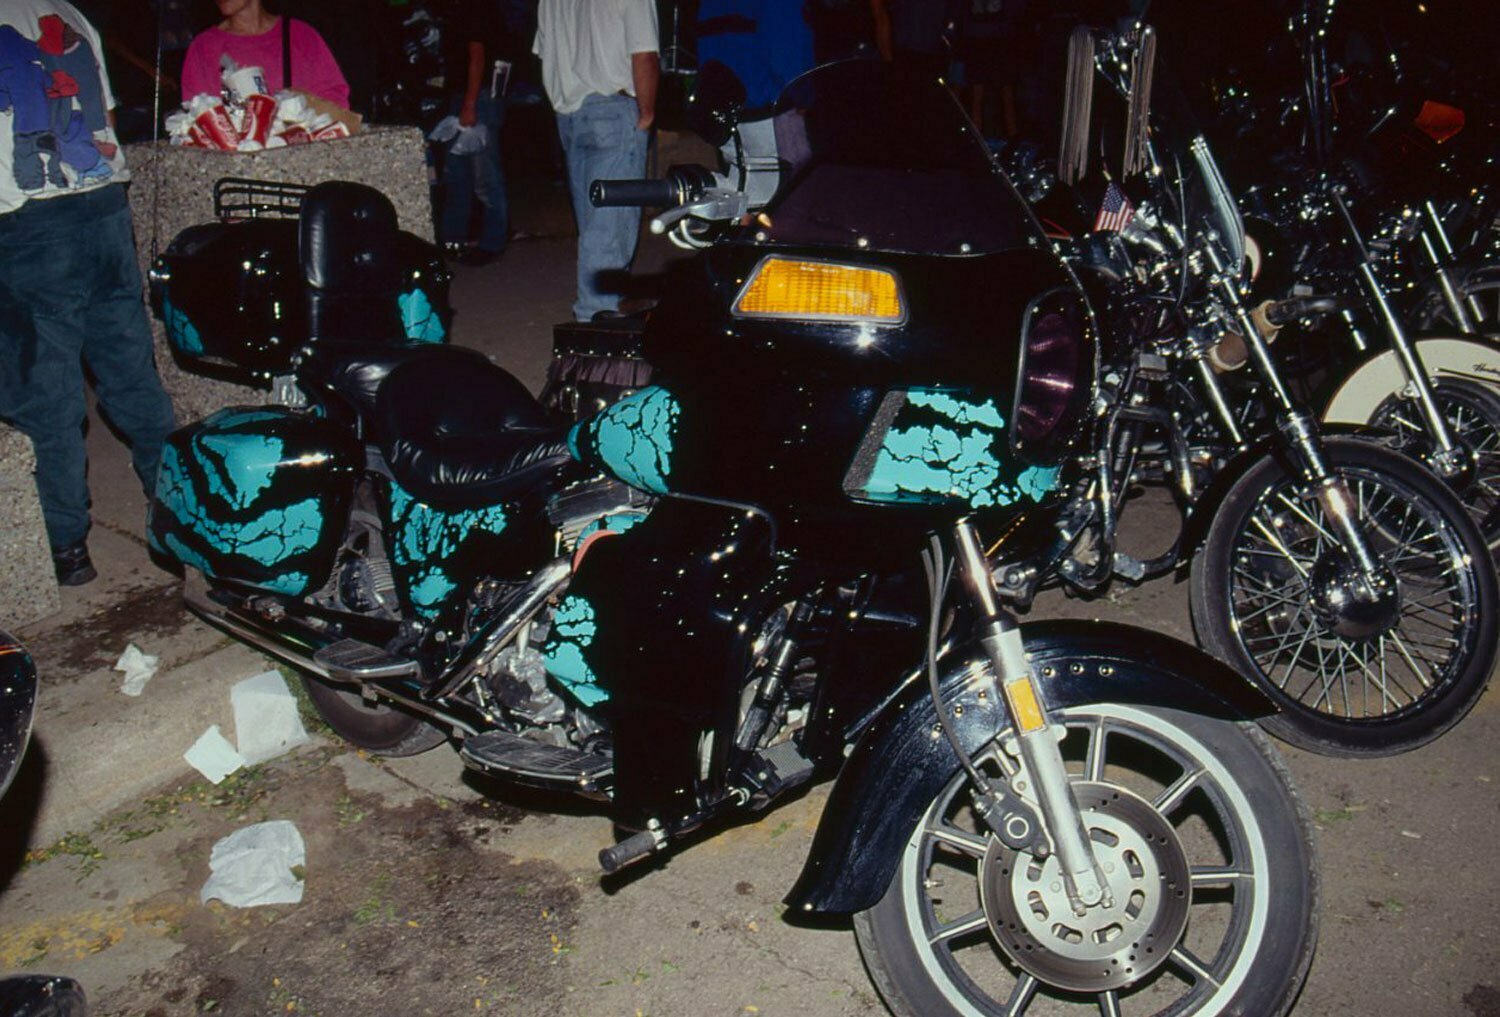 Even in poor lighting this Harley’s marbled cyan paint stands out from the other parked hogs.